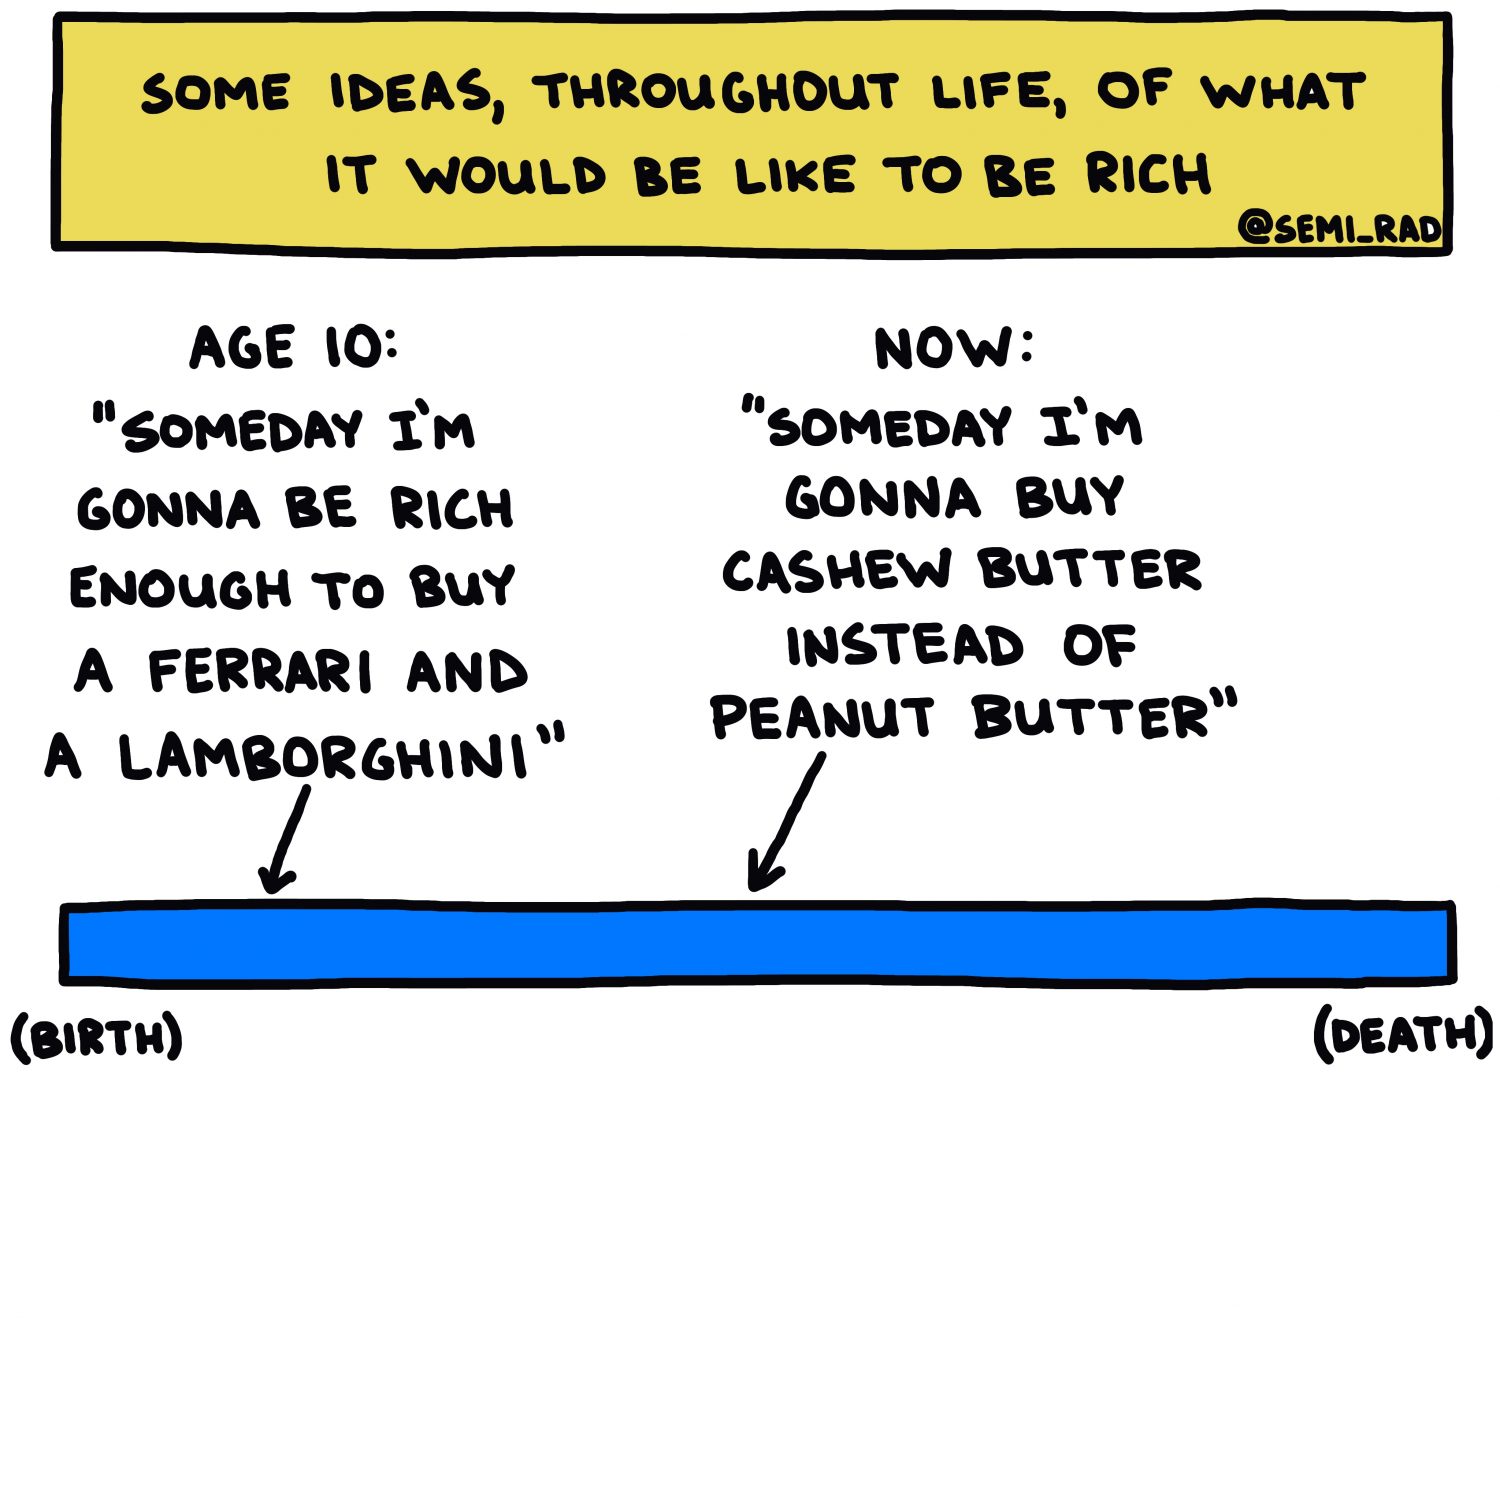 semi-rad chart: some ideas, throughout life, of what it would be like to be rich